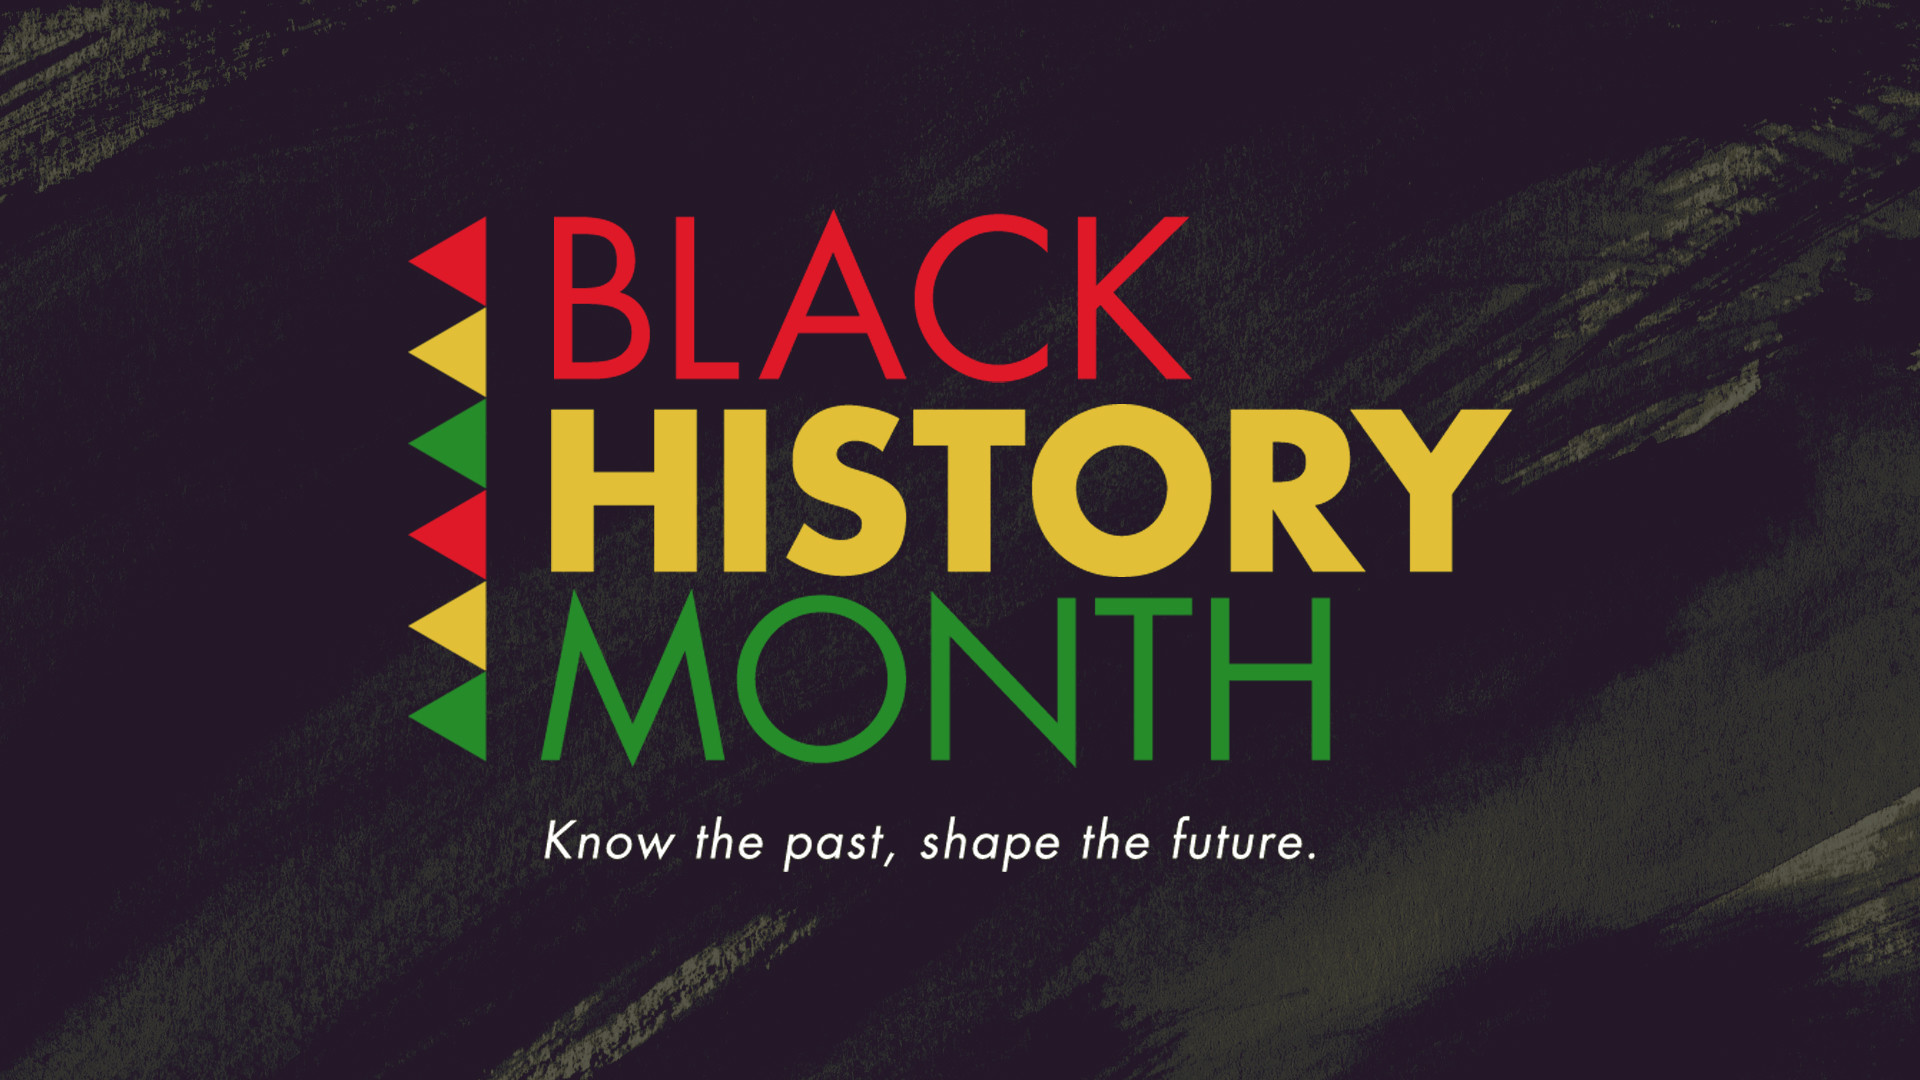 1920x1080 black history month wallpaper - photo #1. Inspiring photography from the  Wallpaper picture desk